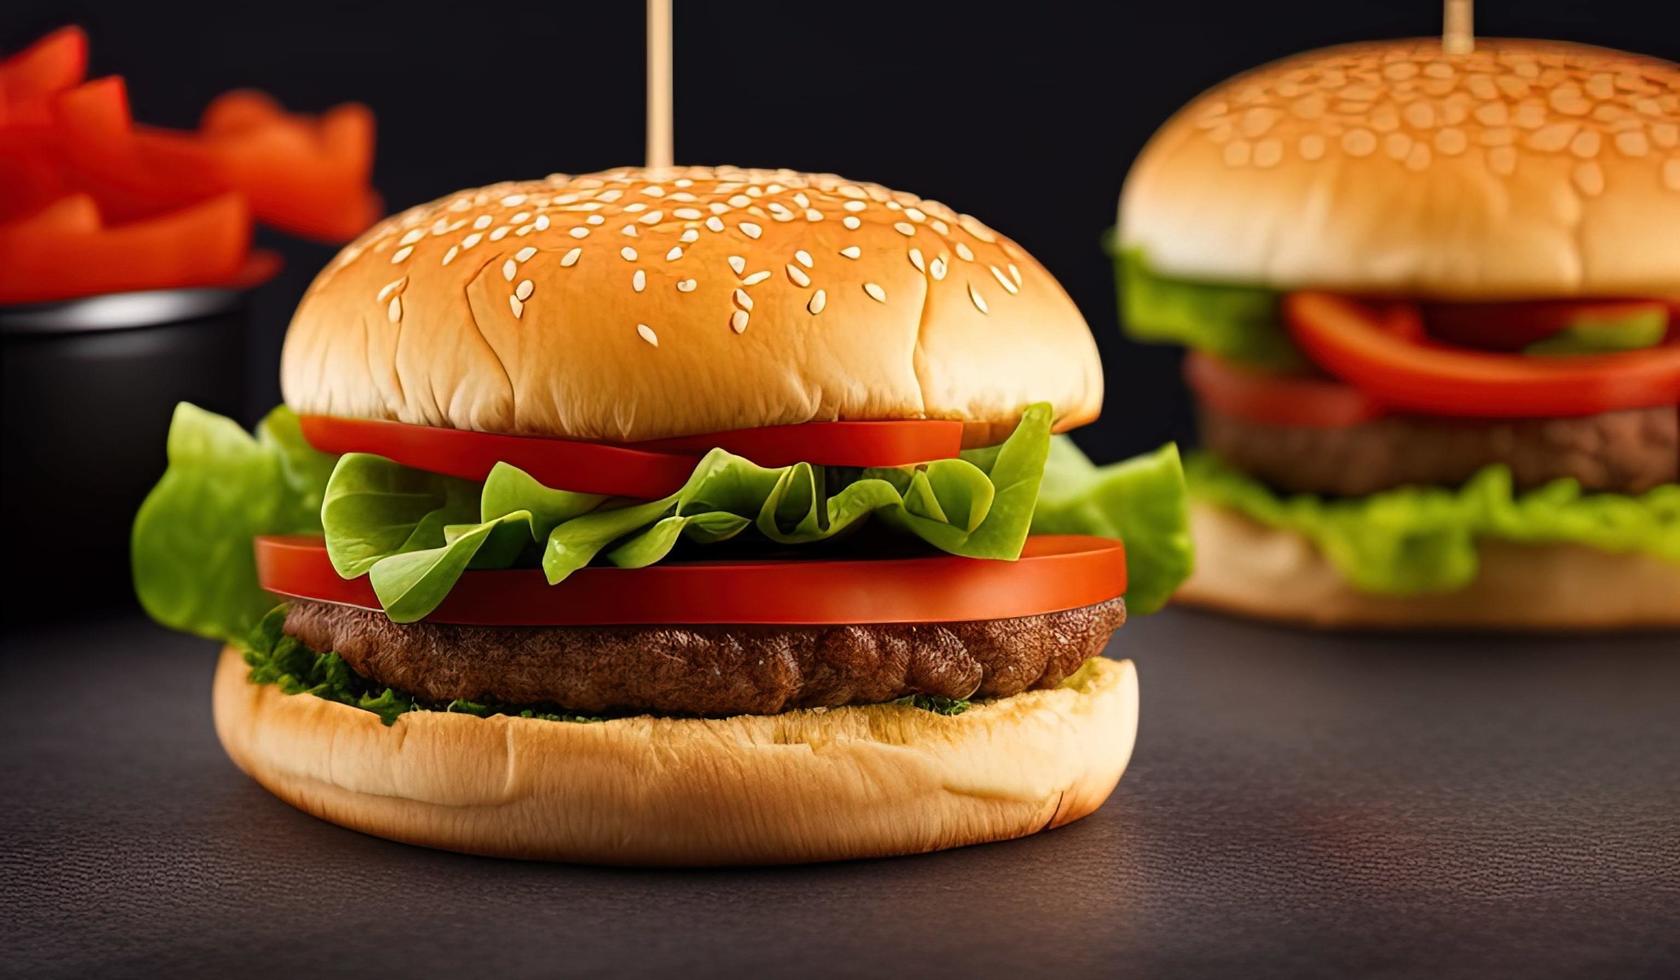 professional food photography close up of a a hamburger with lettuce and tomato on a black backgroun photo